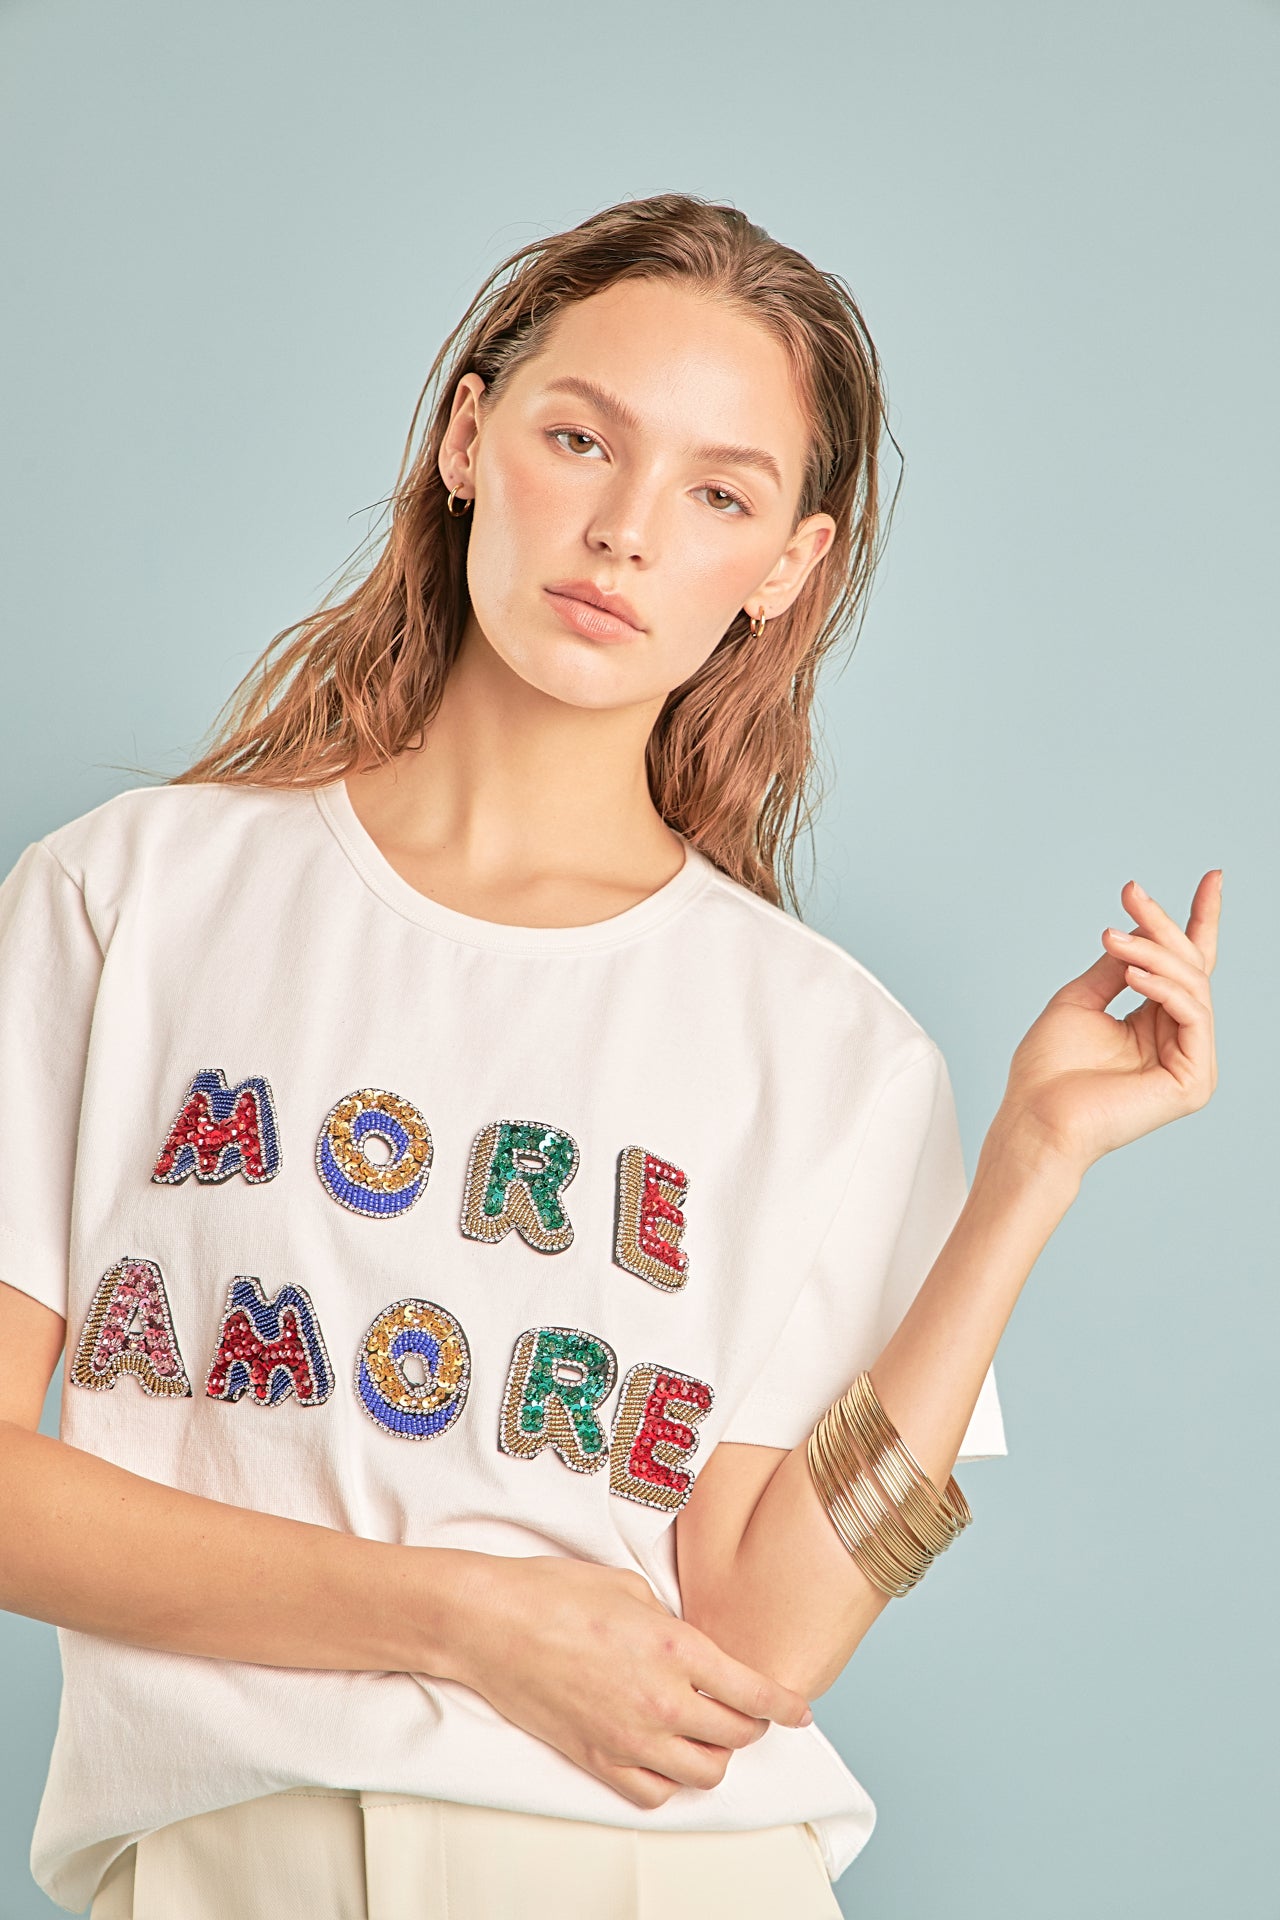 Shop the More Amore Embellished Sweatshirt from Endless Rose